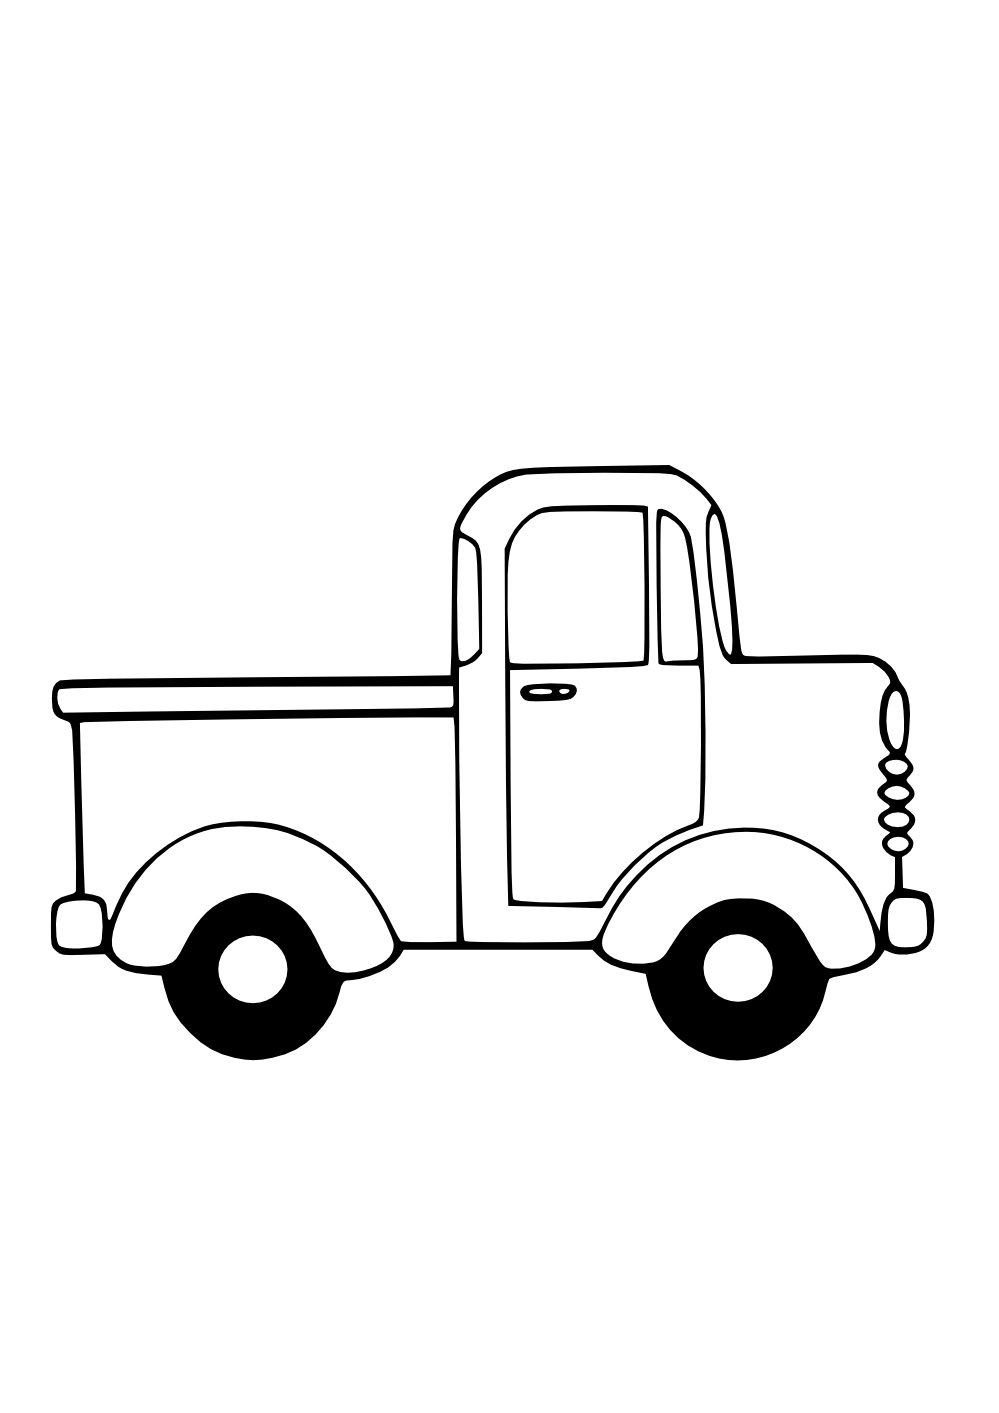 Truck black and white. Plane clipart old school